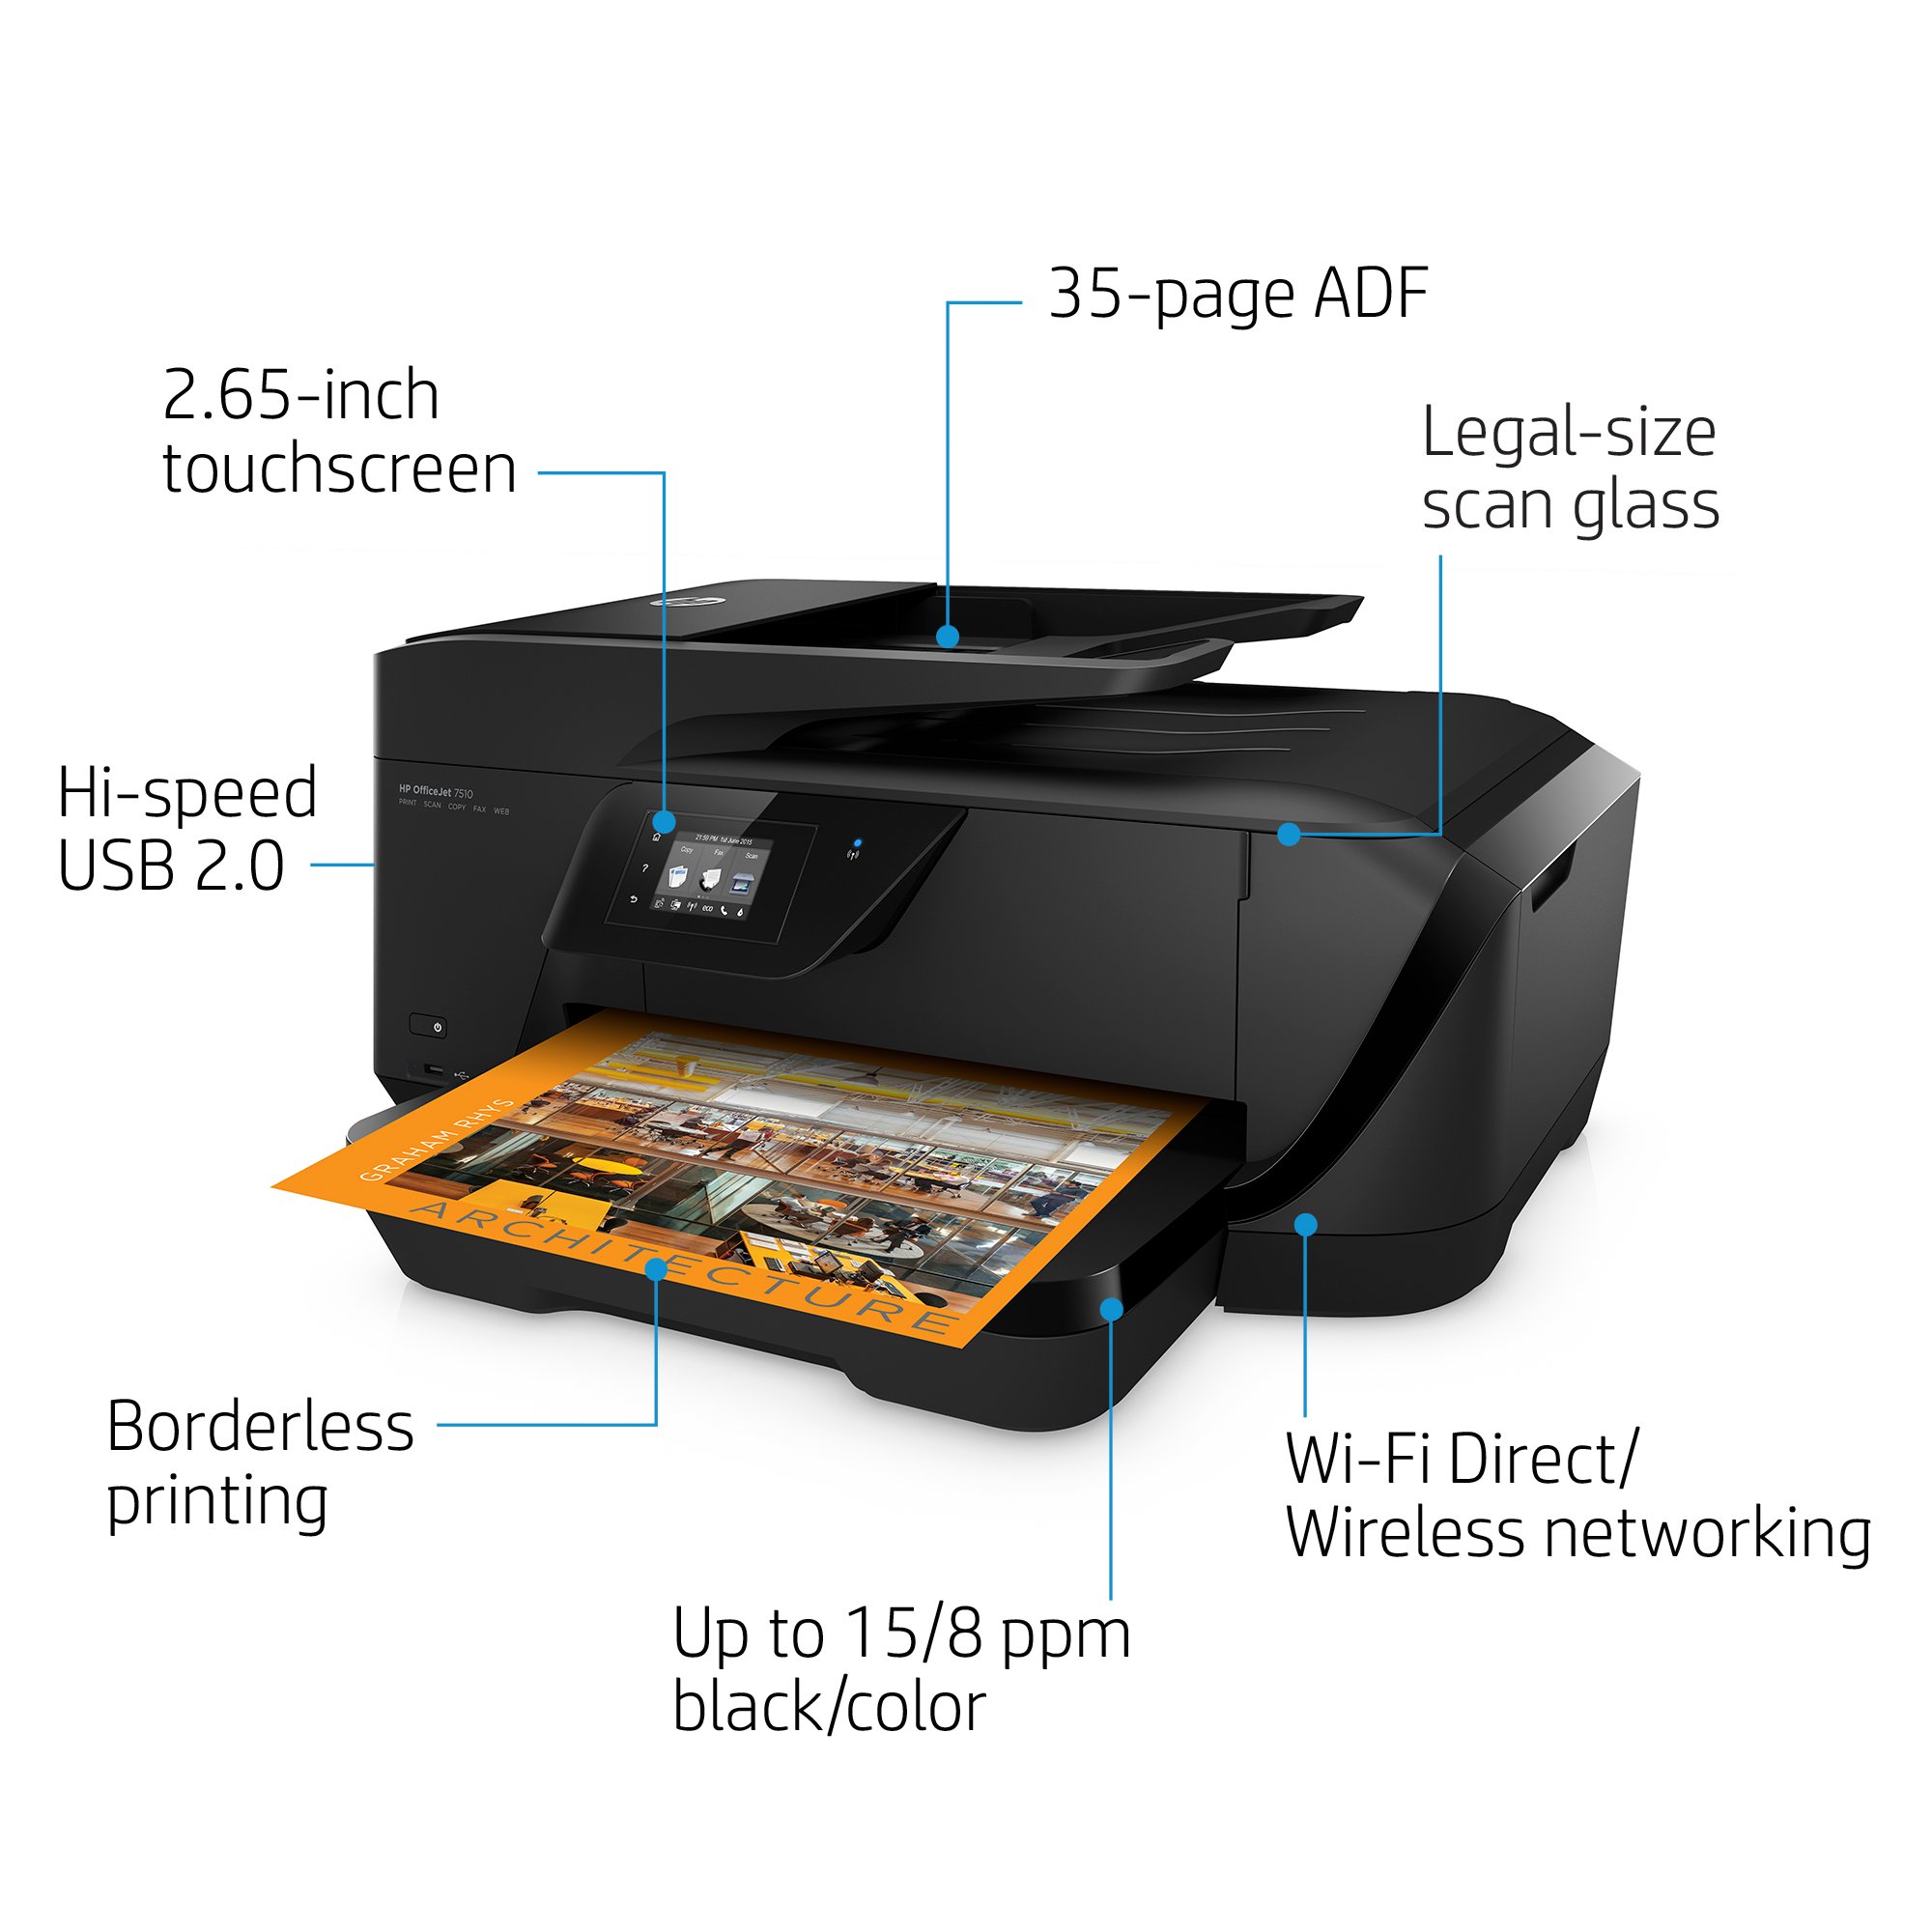 OfficeJet 7510 Wide Format All-in-One Printer series